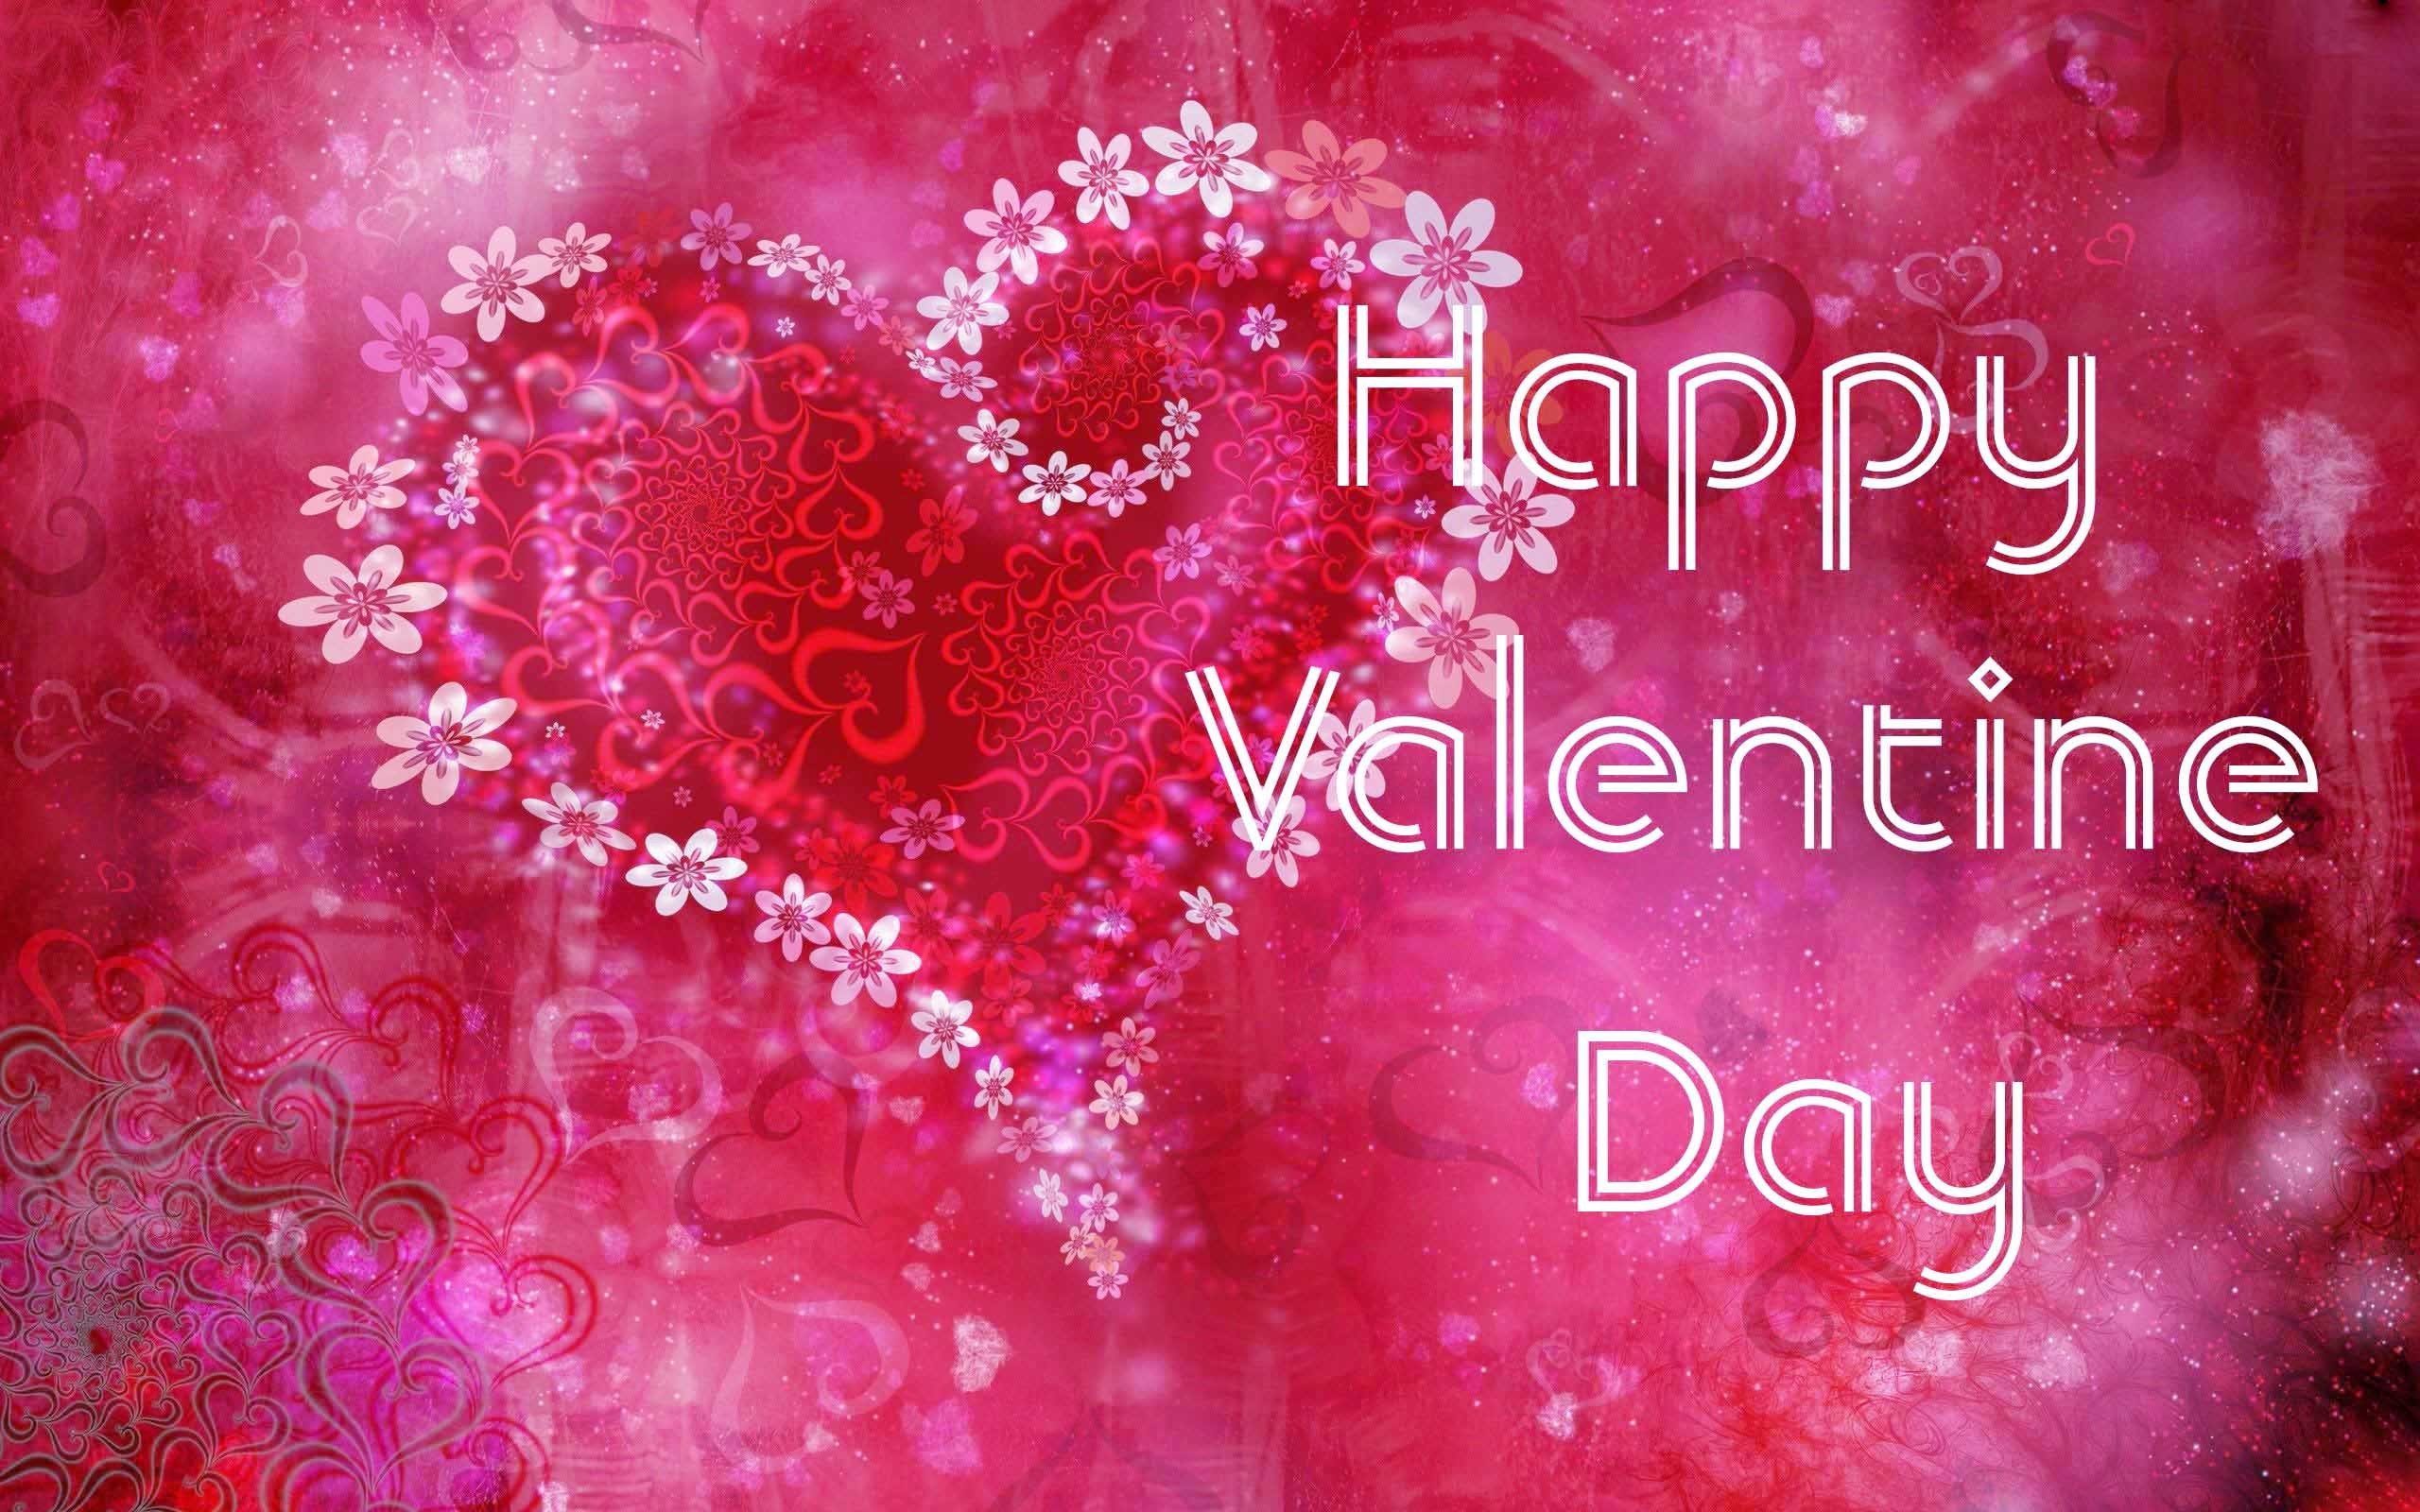 Happy Valentines Day Wallpaper Valentines Wallpapers Free